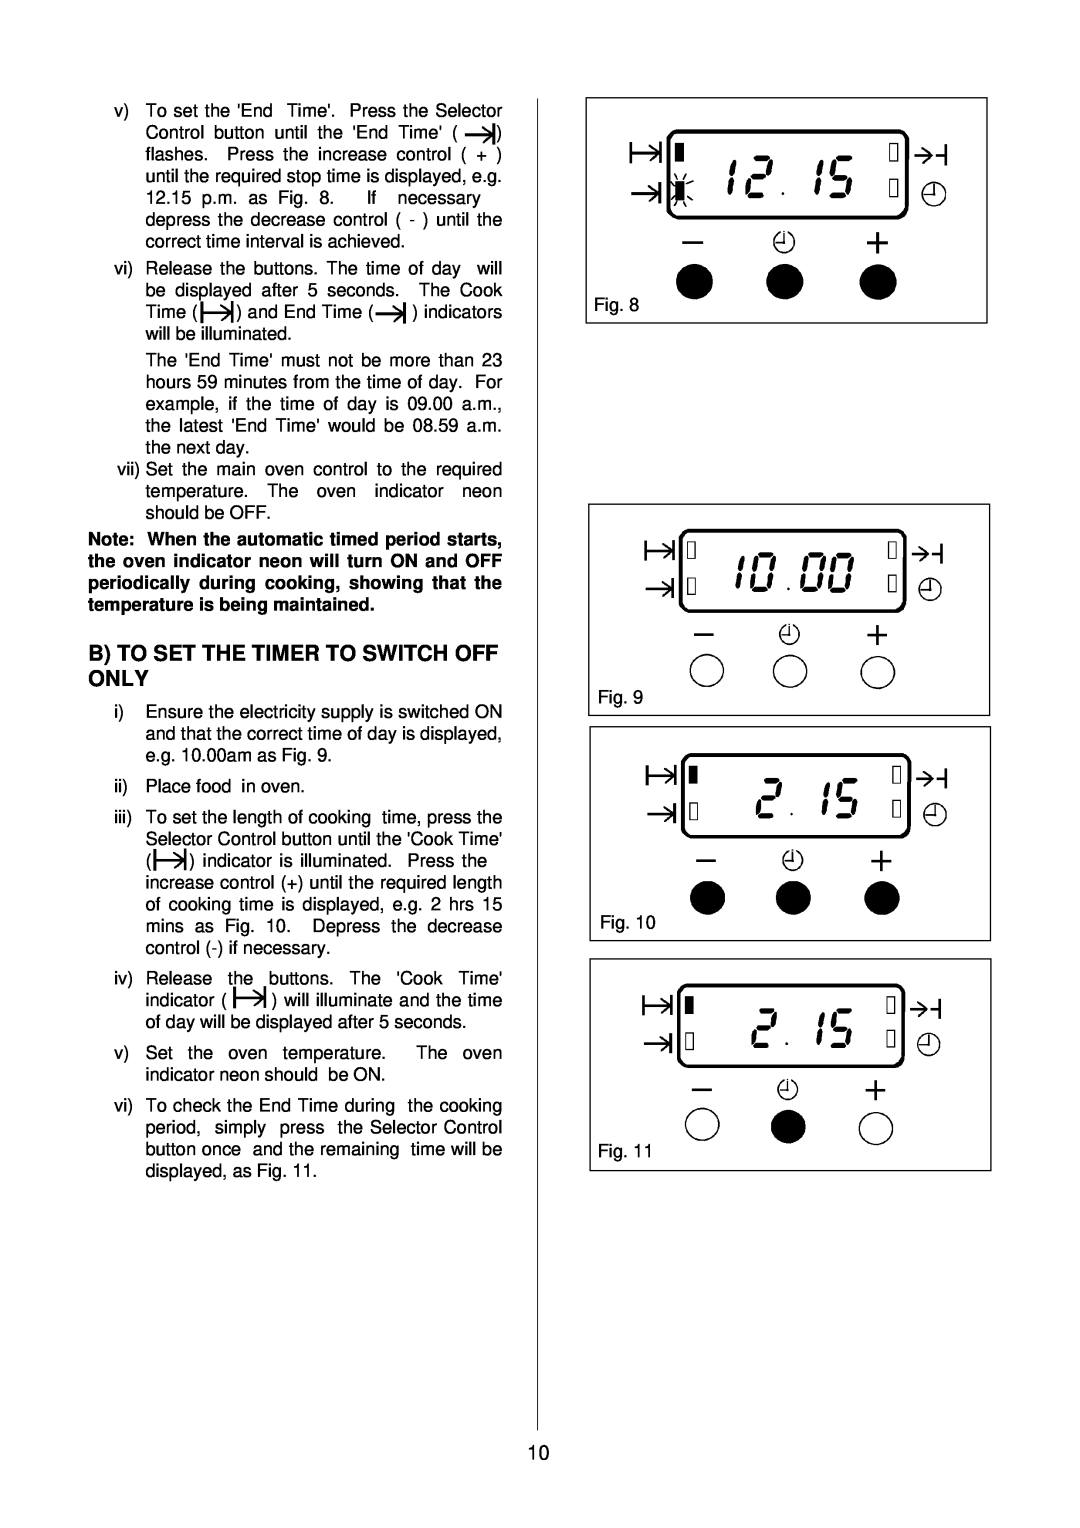 Electrolux D2160-1 operating instructions B To Set The Timer To Switch Off Only 